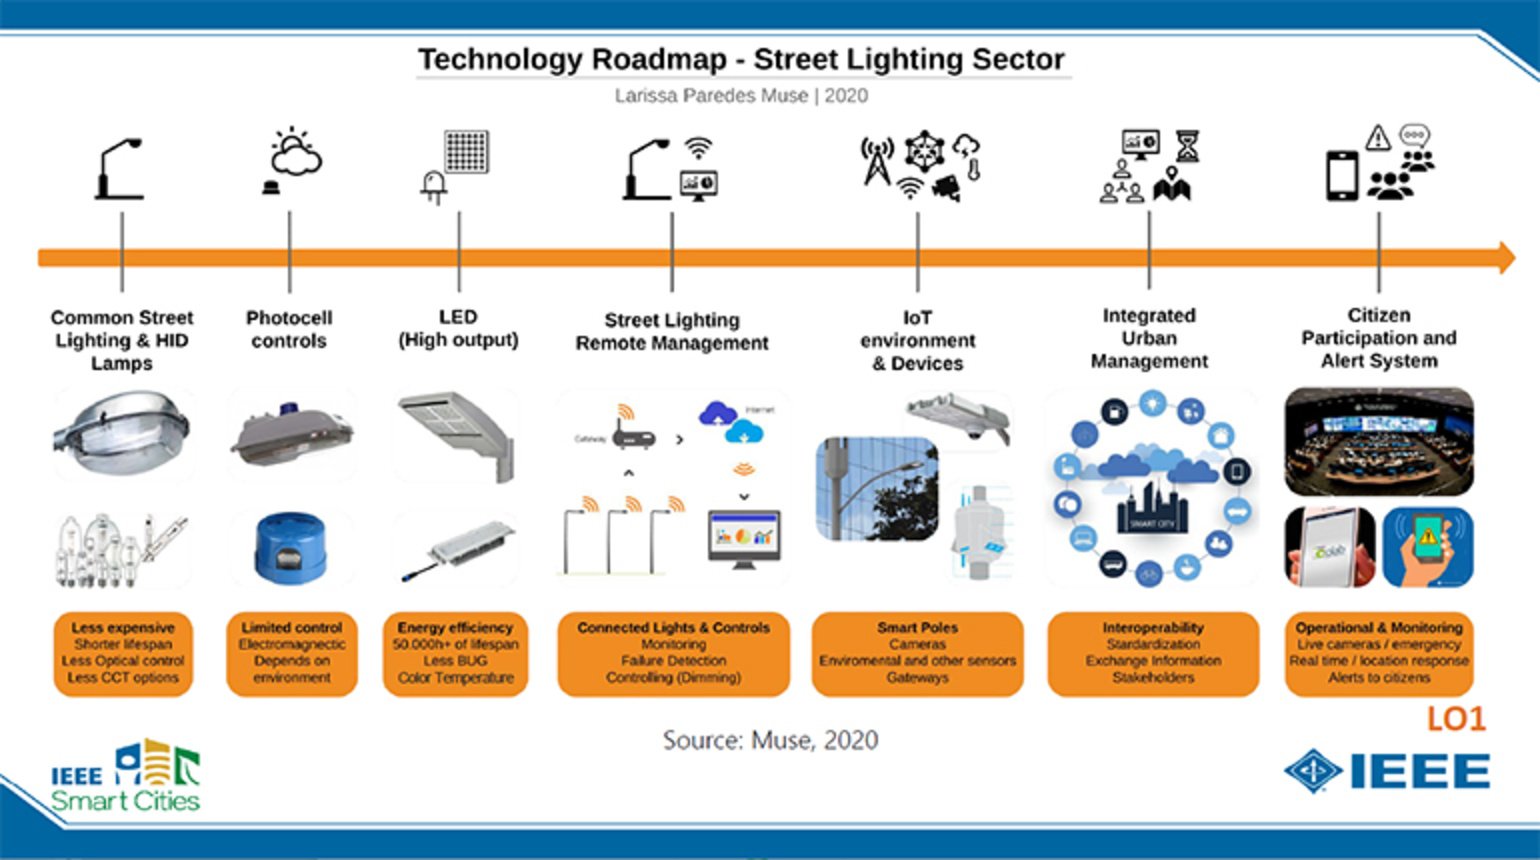 Smart Cities - IoT and Smart Street Lighting from a Brazilian perspective